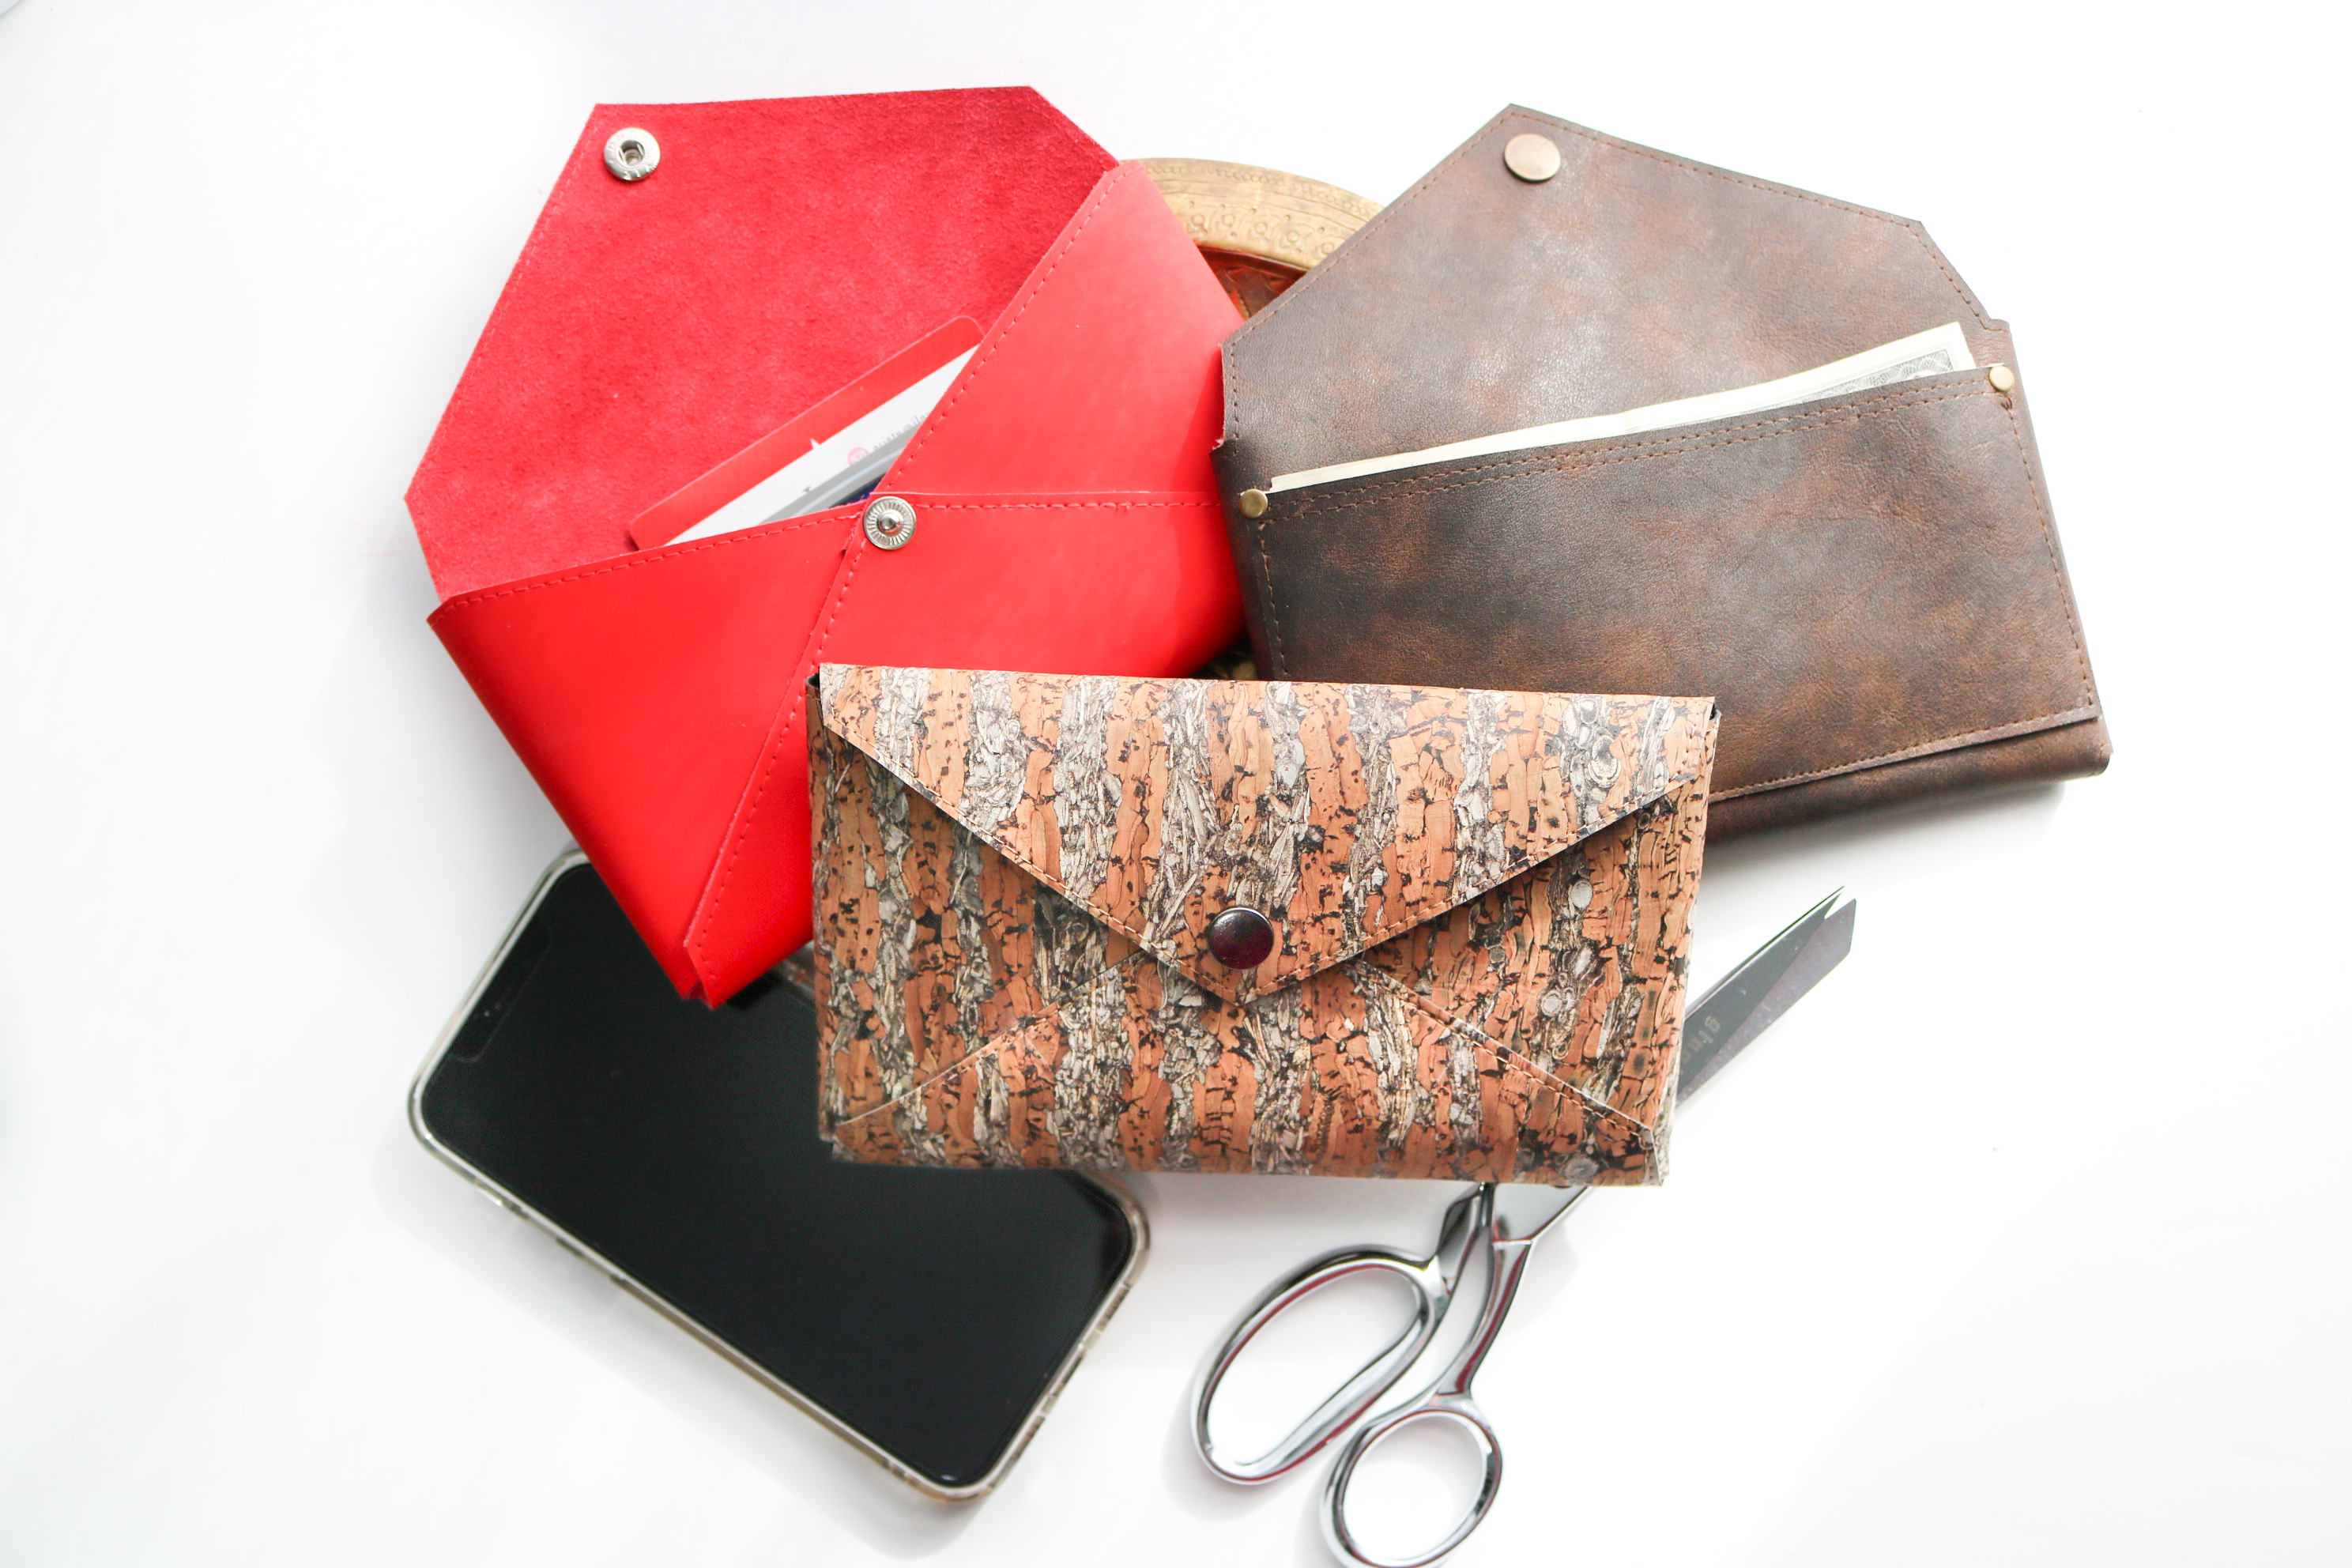 Leather Wallet cutting Template Pattern With Sewing Stiches